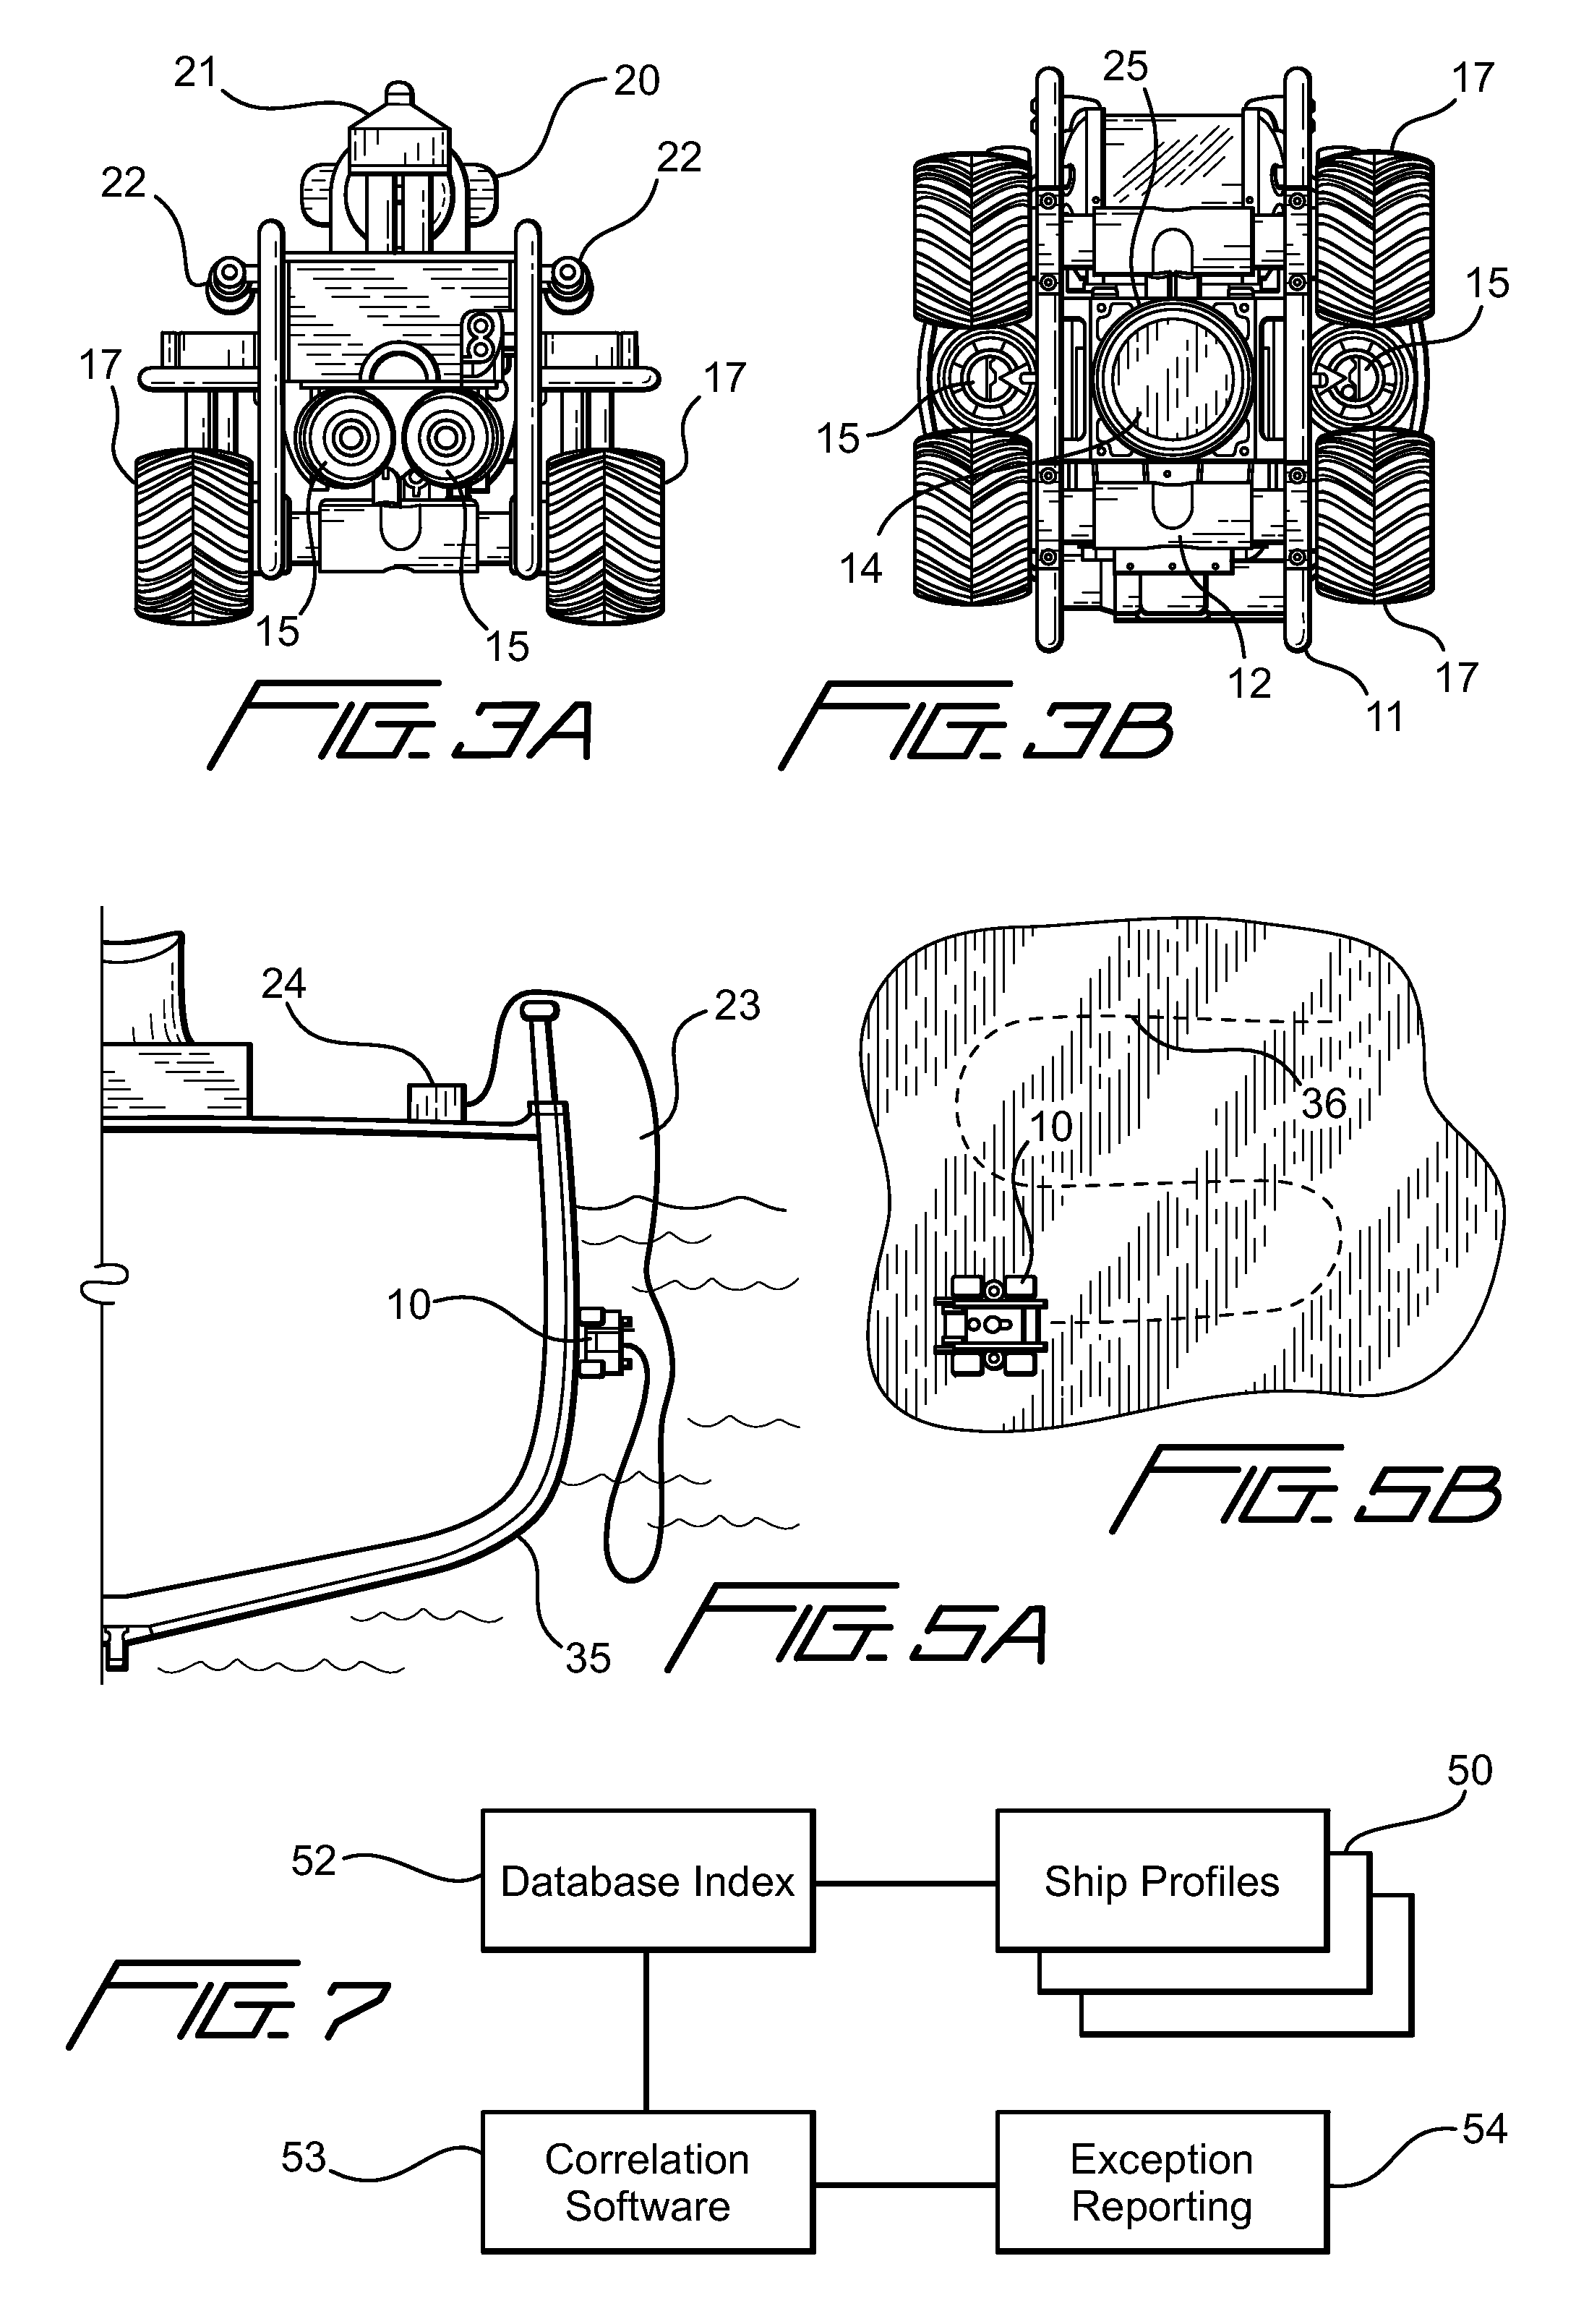 Underwater crawler vehicle having search and identification capabilities and methods of use